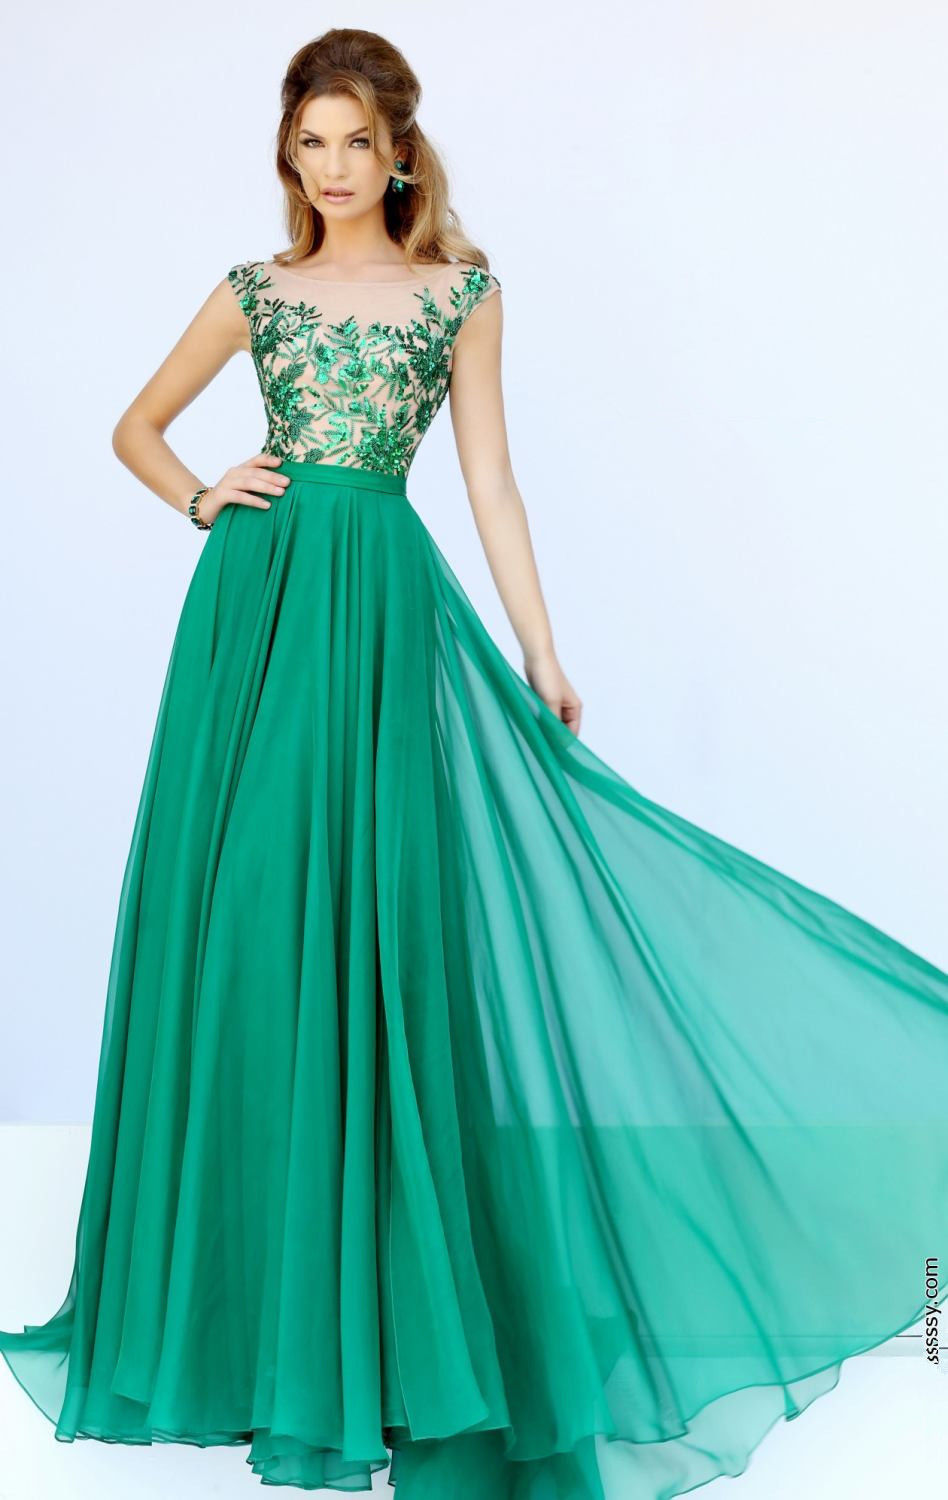 Green Long Evening Dresses 2016 Schoop Neck Evening Gowns,cap Sleeve Evening Dress,plus Size Prom Party Gown,chiffon Prom Dresses